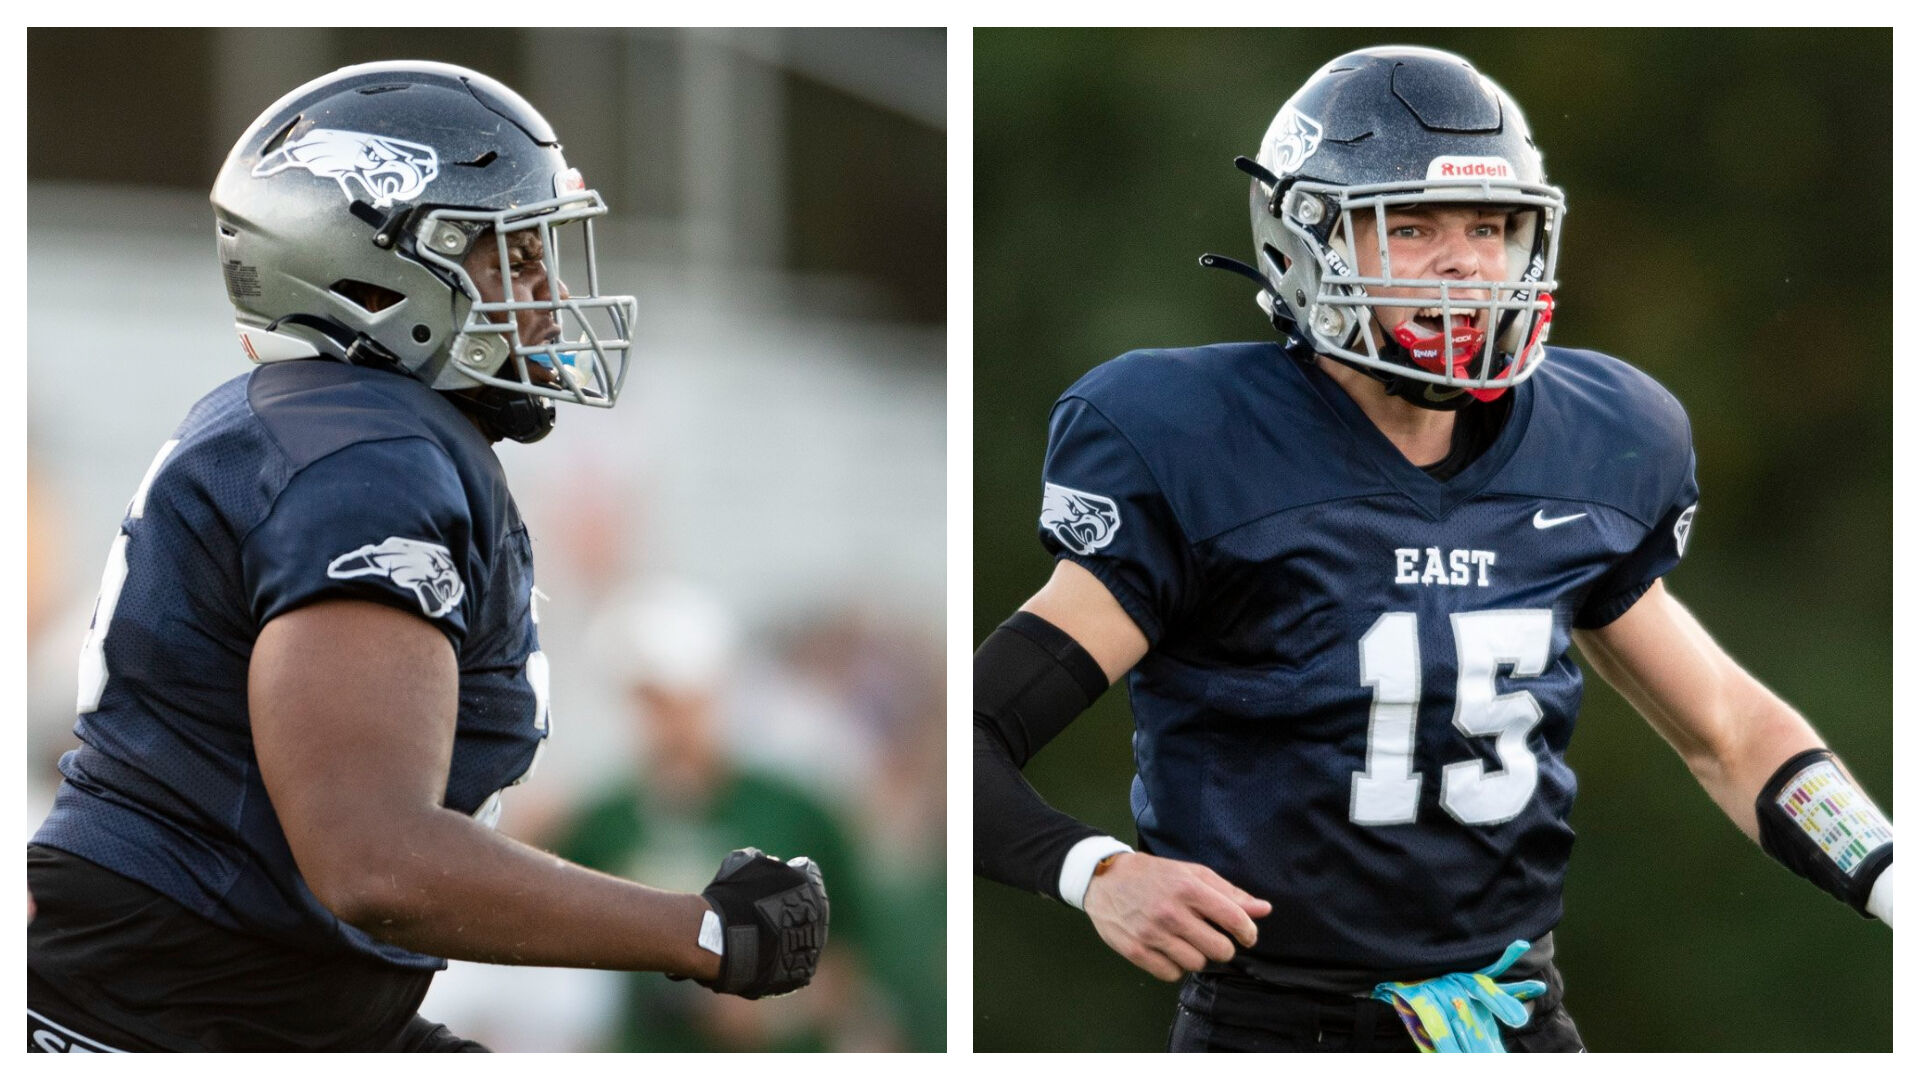 M.J. Mullins and Robbie Whitney lead stingy East Forsyth defense going into crucial game against West Forsyth